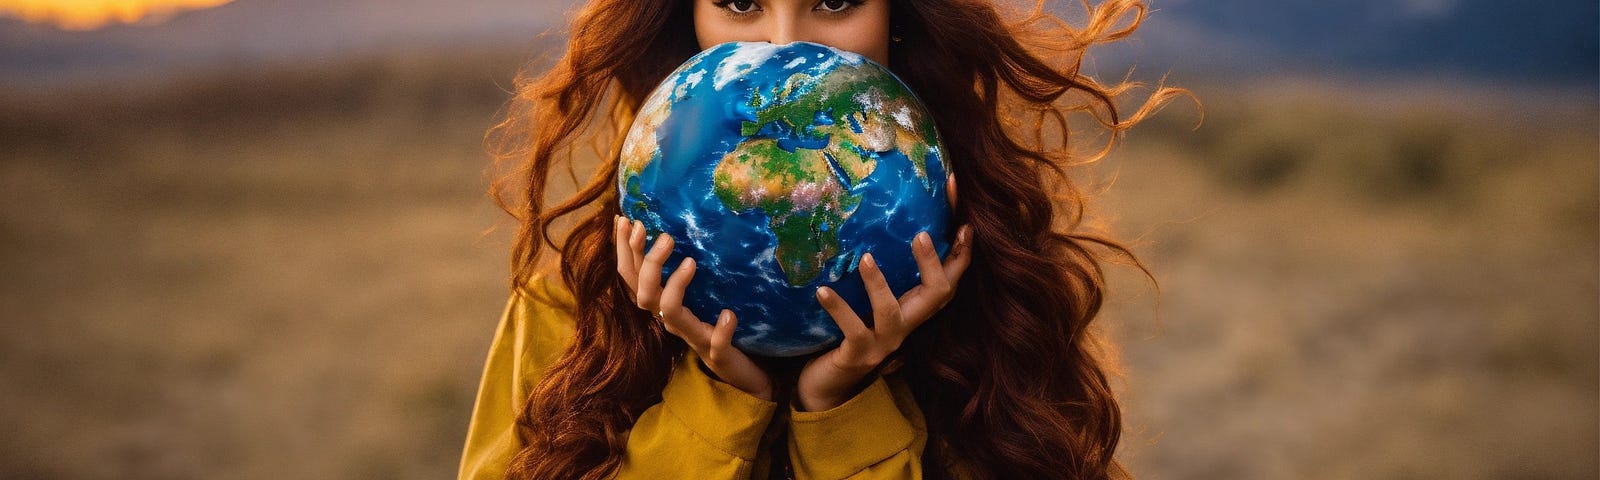 a woman holding the Earth in her hands